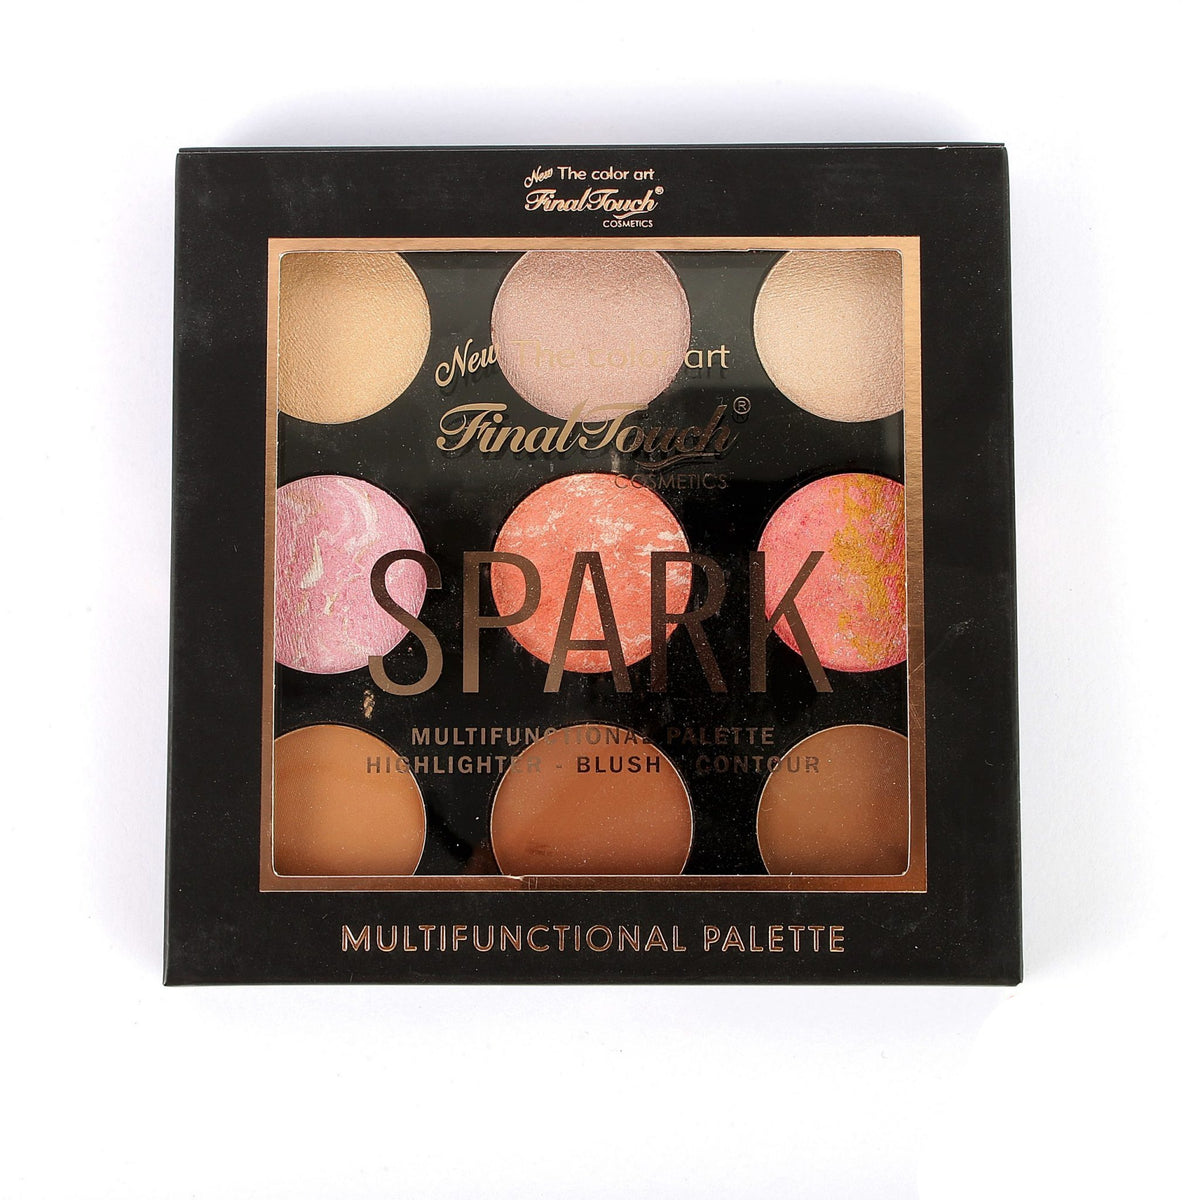 Final Touch Spark Multifunctional Palette Highlighter - Blush - Contour 22.5g 01 freeshipping - lasertag.pk